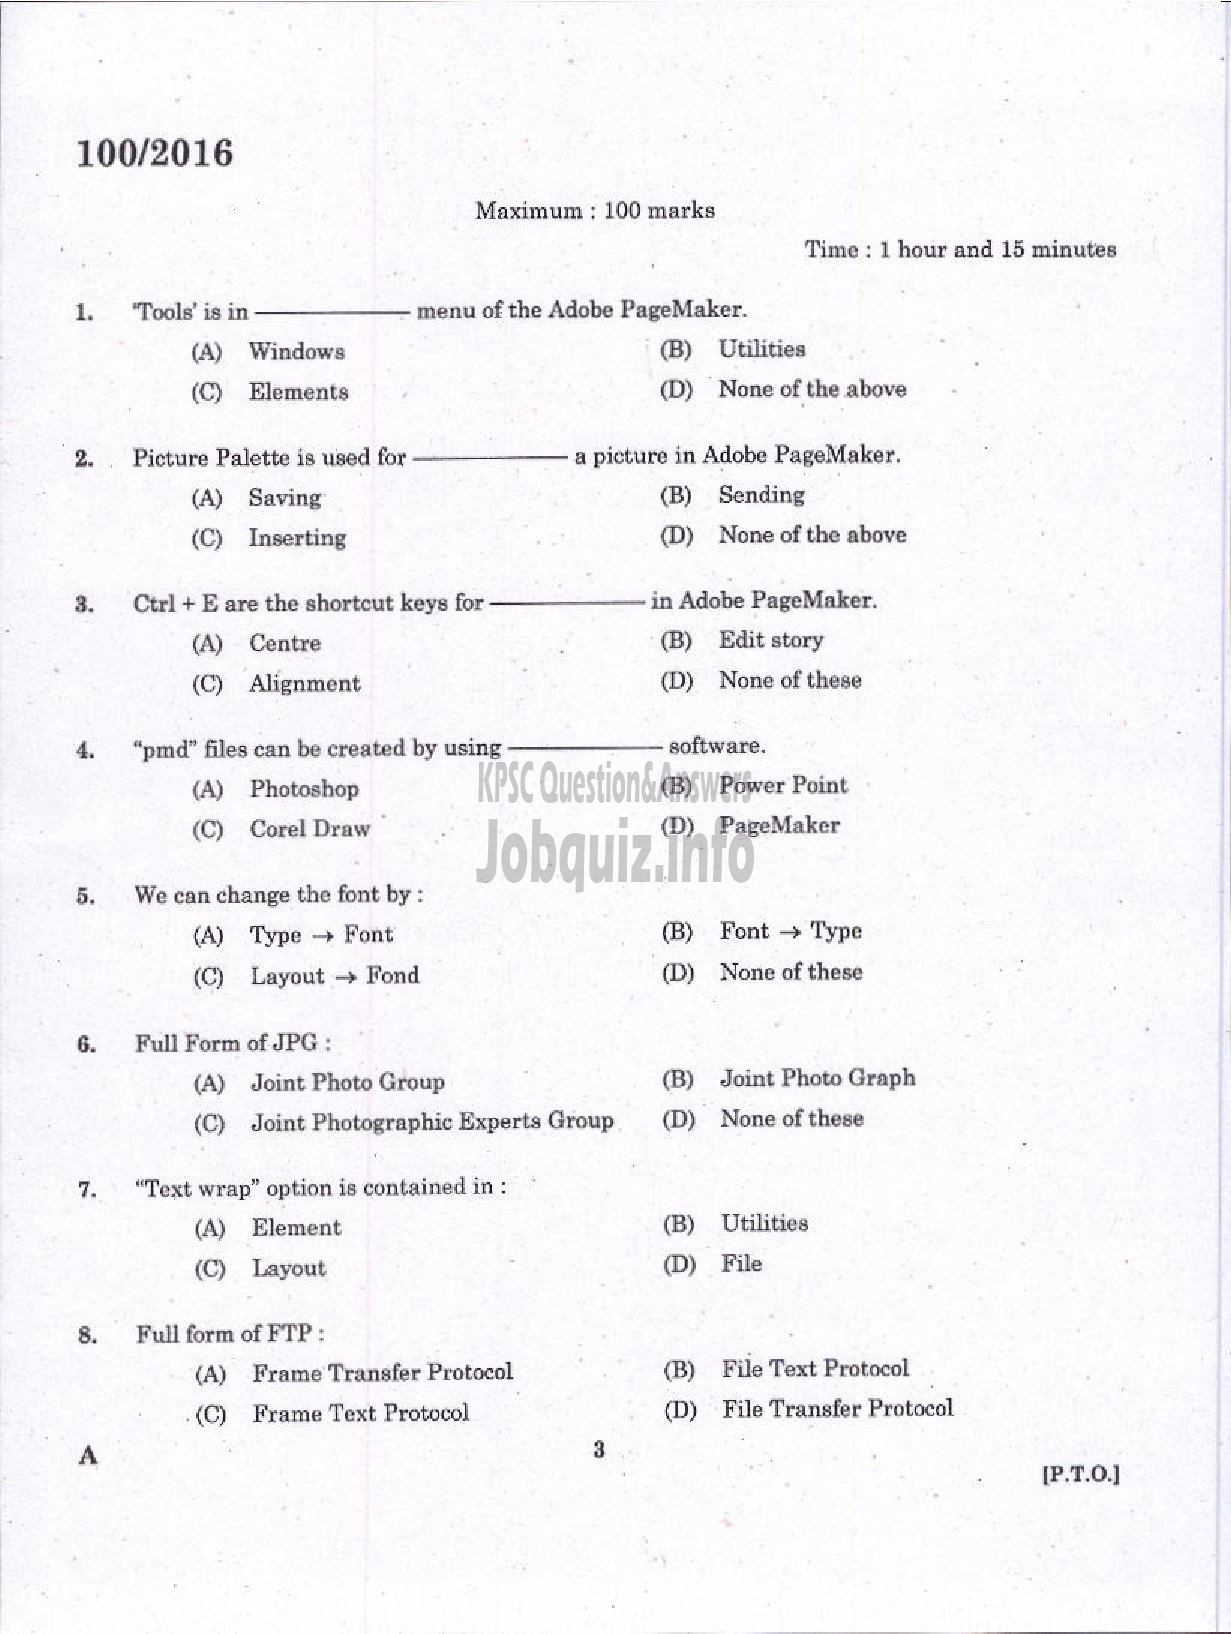 Kerala PSC Question Paper - DATA ENTRY OPERATOR DCB-1